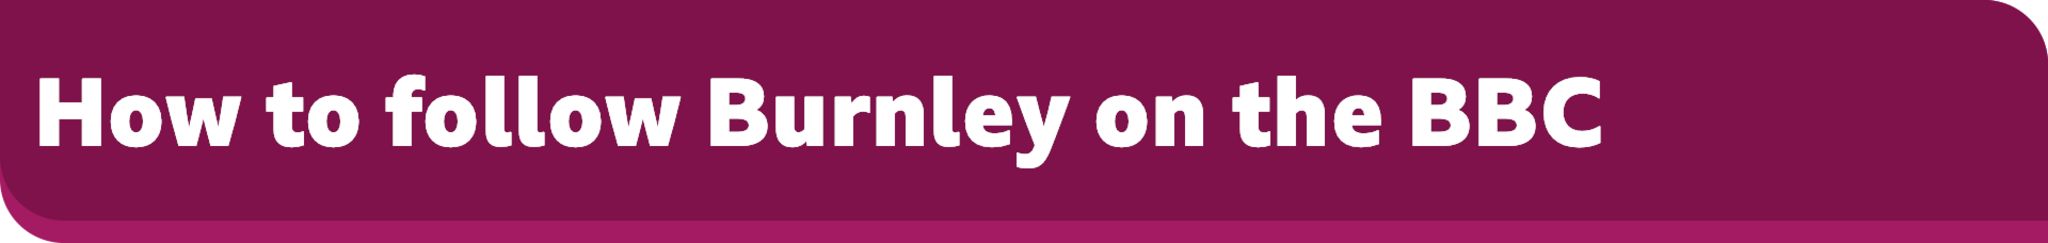 How to follow Burnley on the BBC banner